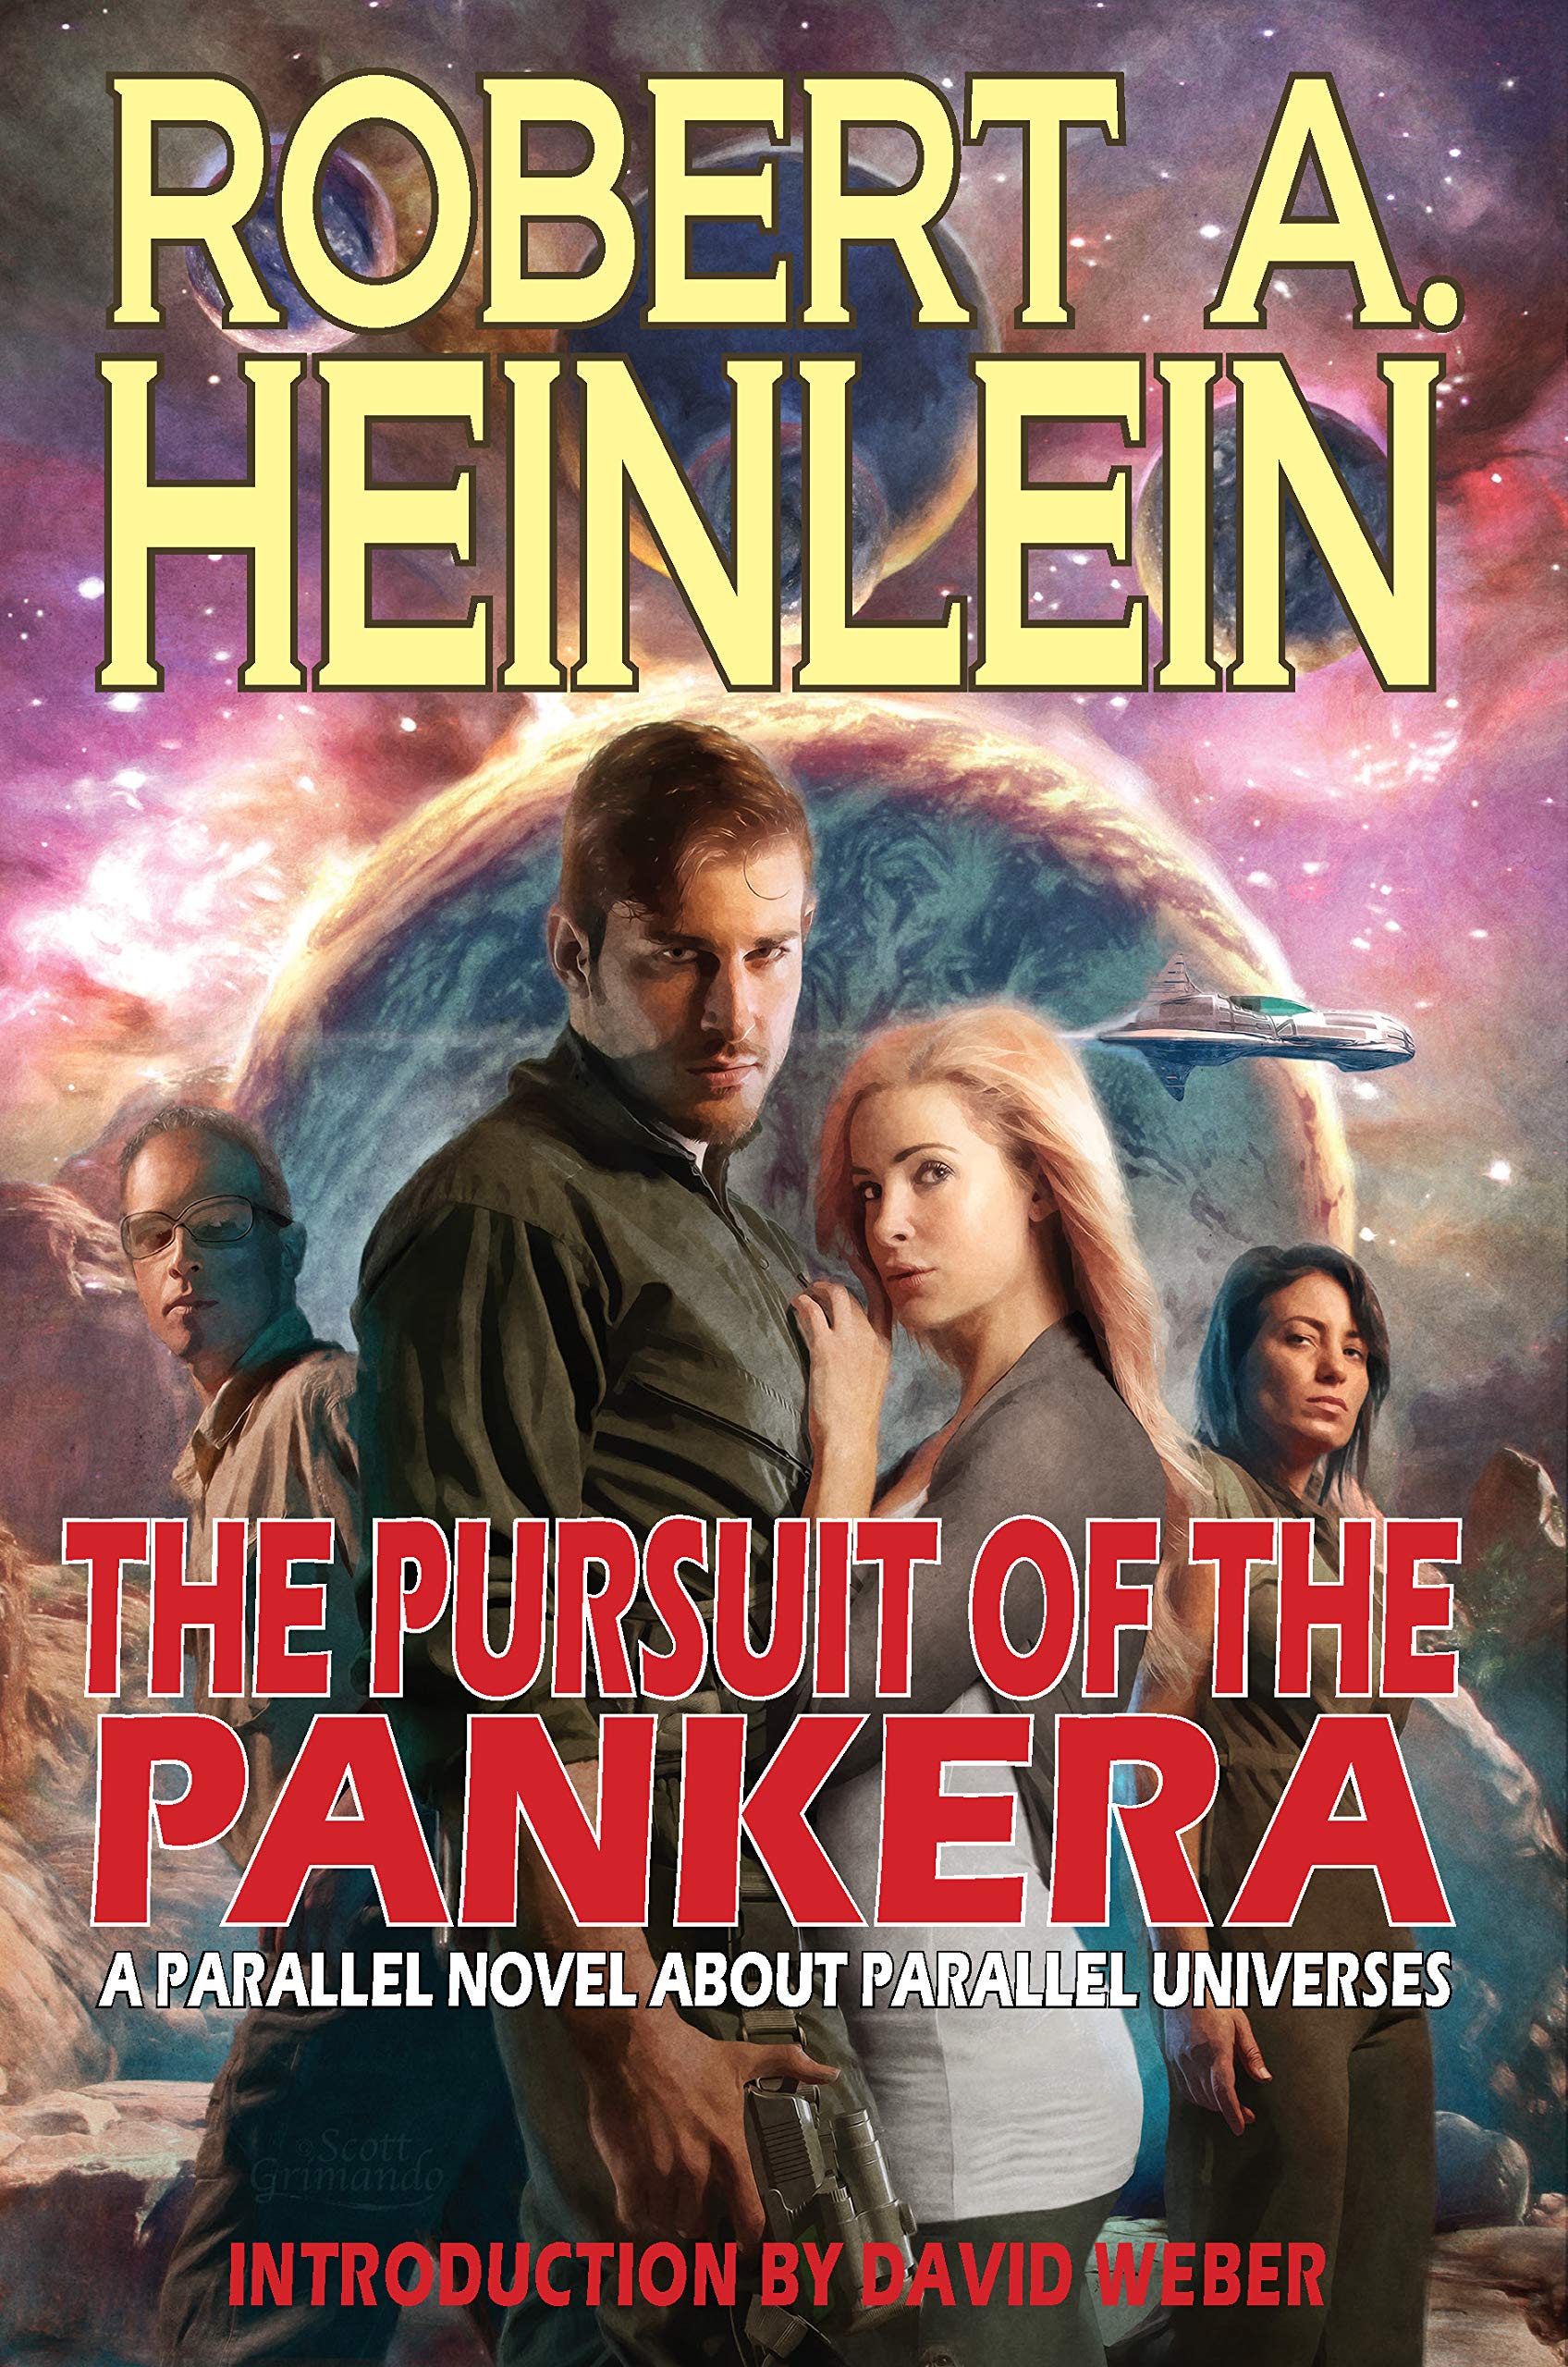 The Pursuit of the Pankera: A Parallel Novel About Parallel Universes